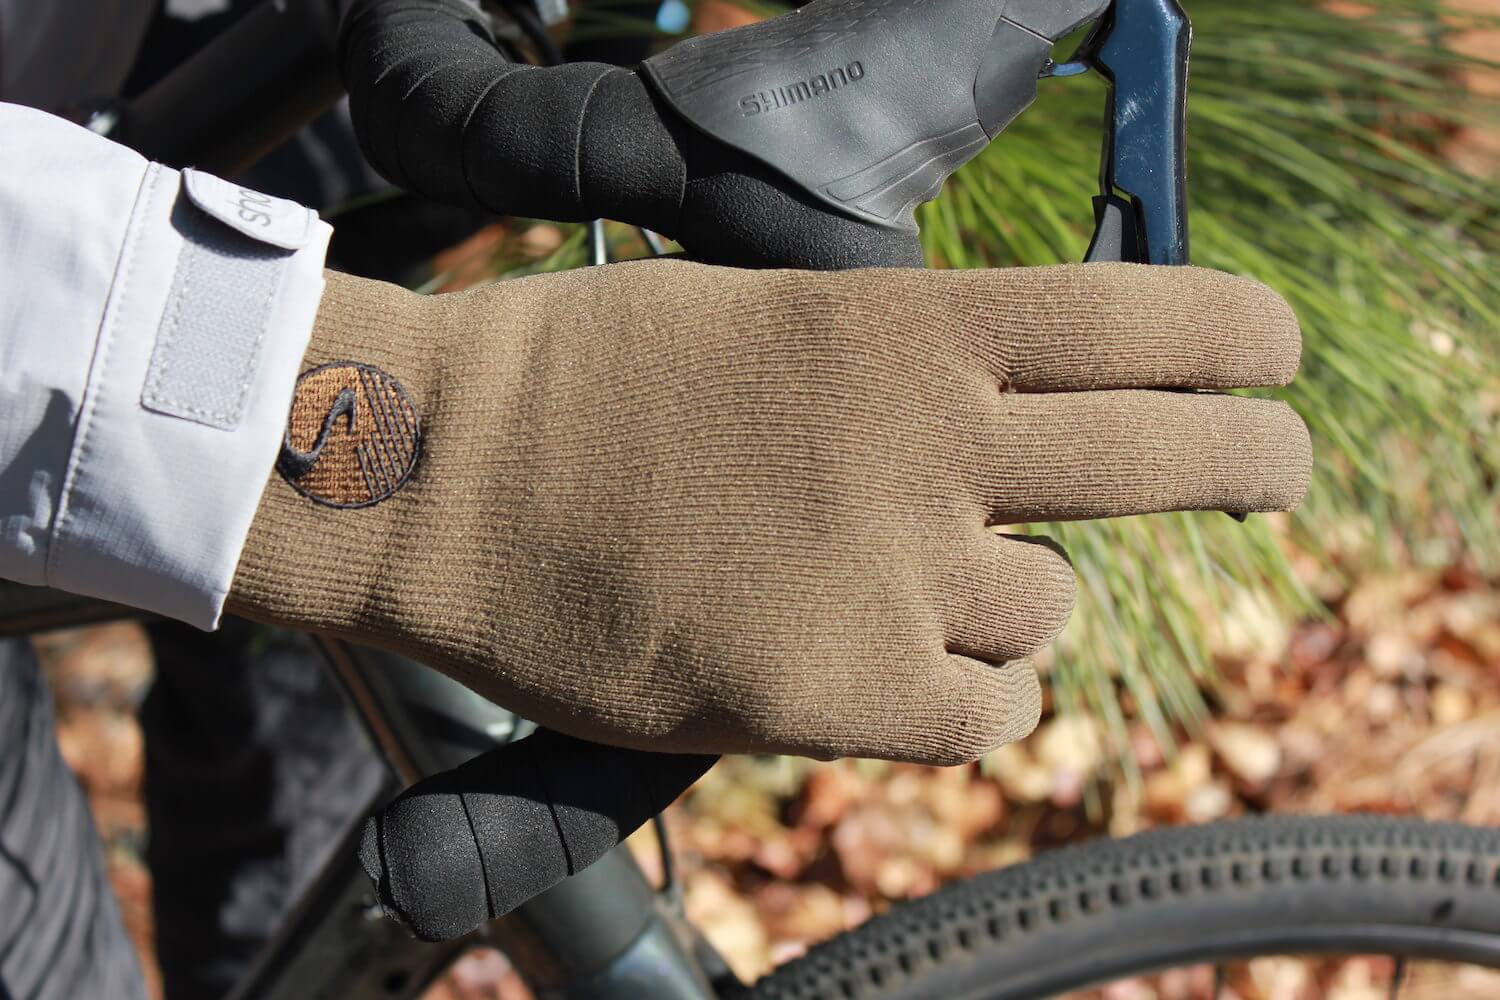 This review photo shows the Showers Pass Crosspoint Waterproof Knit Wool Gloves being worn on a gravel bike by the author.